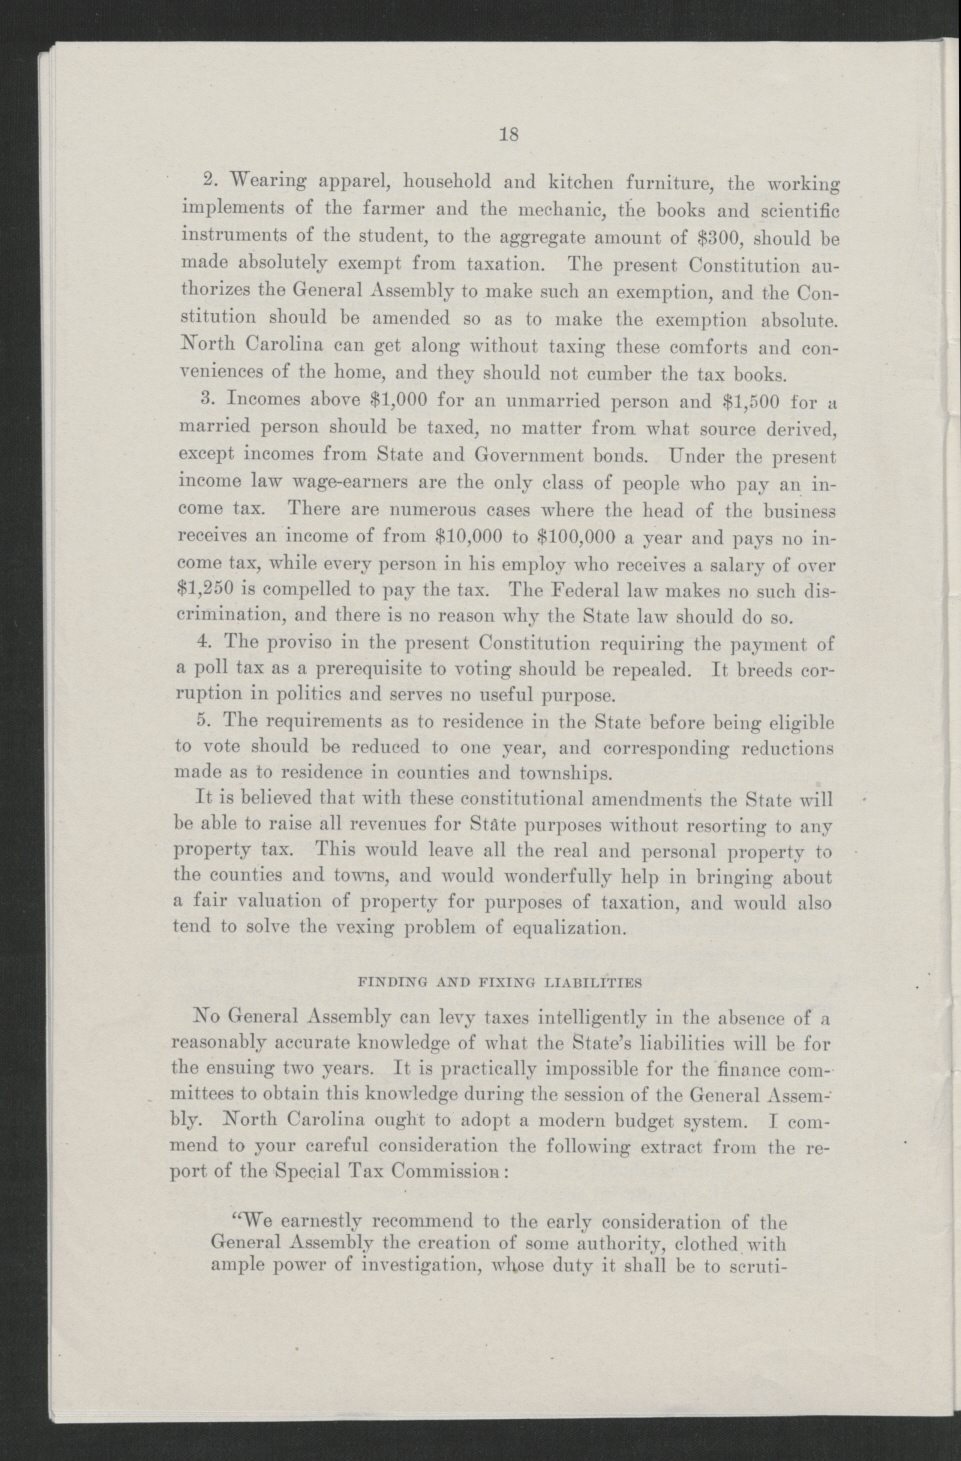 Biennial Message of Governor Thomas W. Bickett to the General Assembly, January 9, 1919, page 16